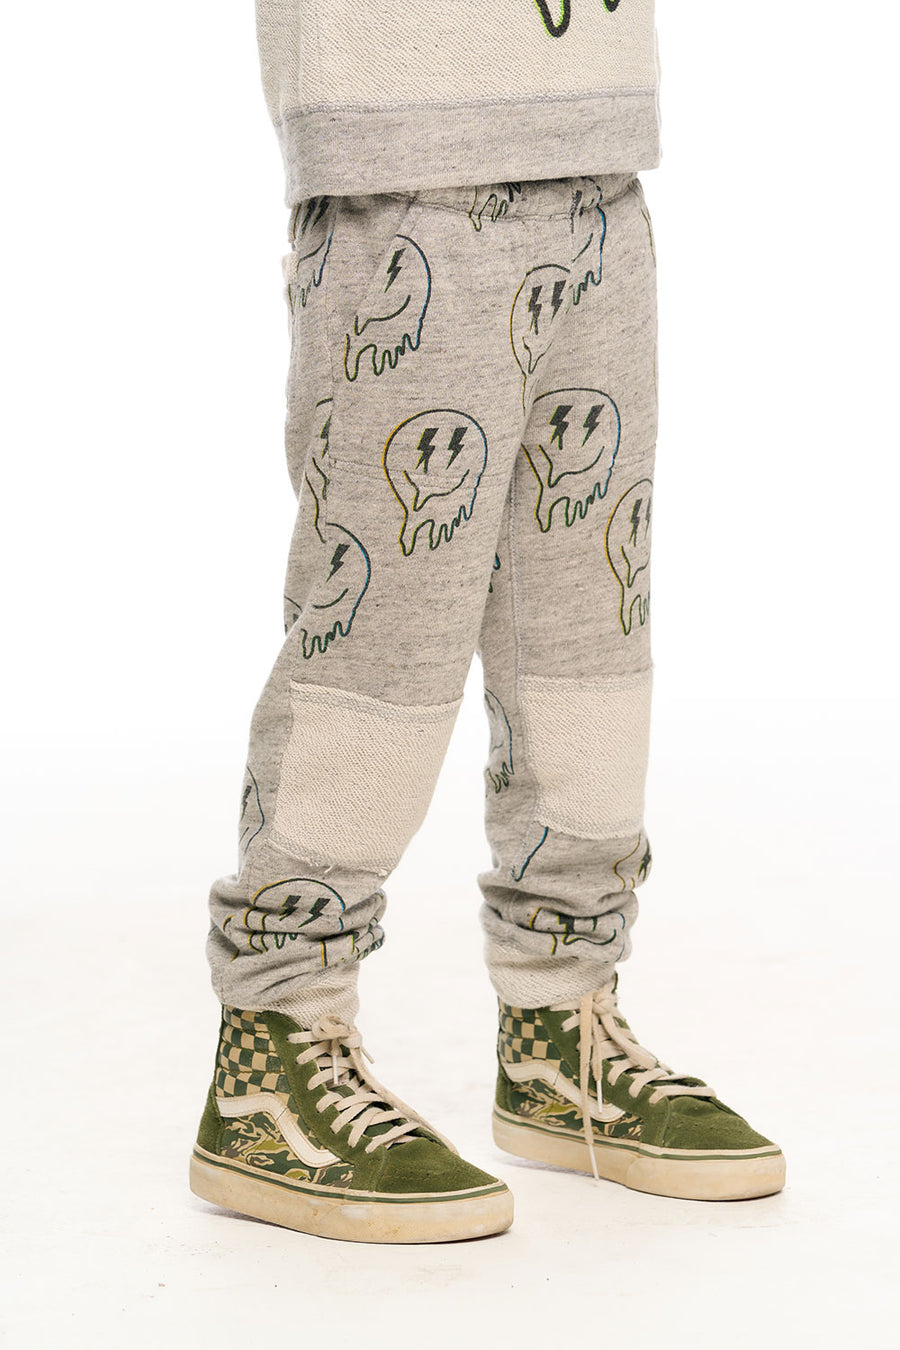 Drippy Smile Pants BOYS chaserbrand